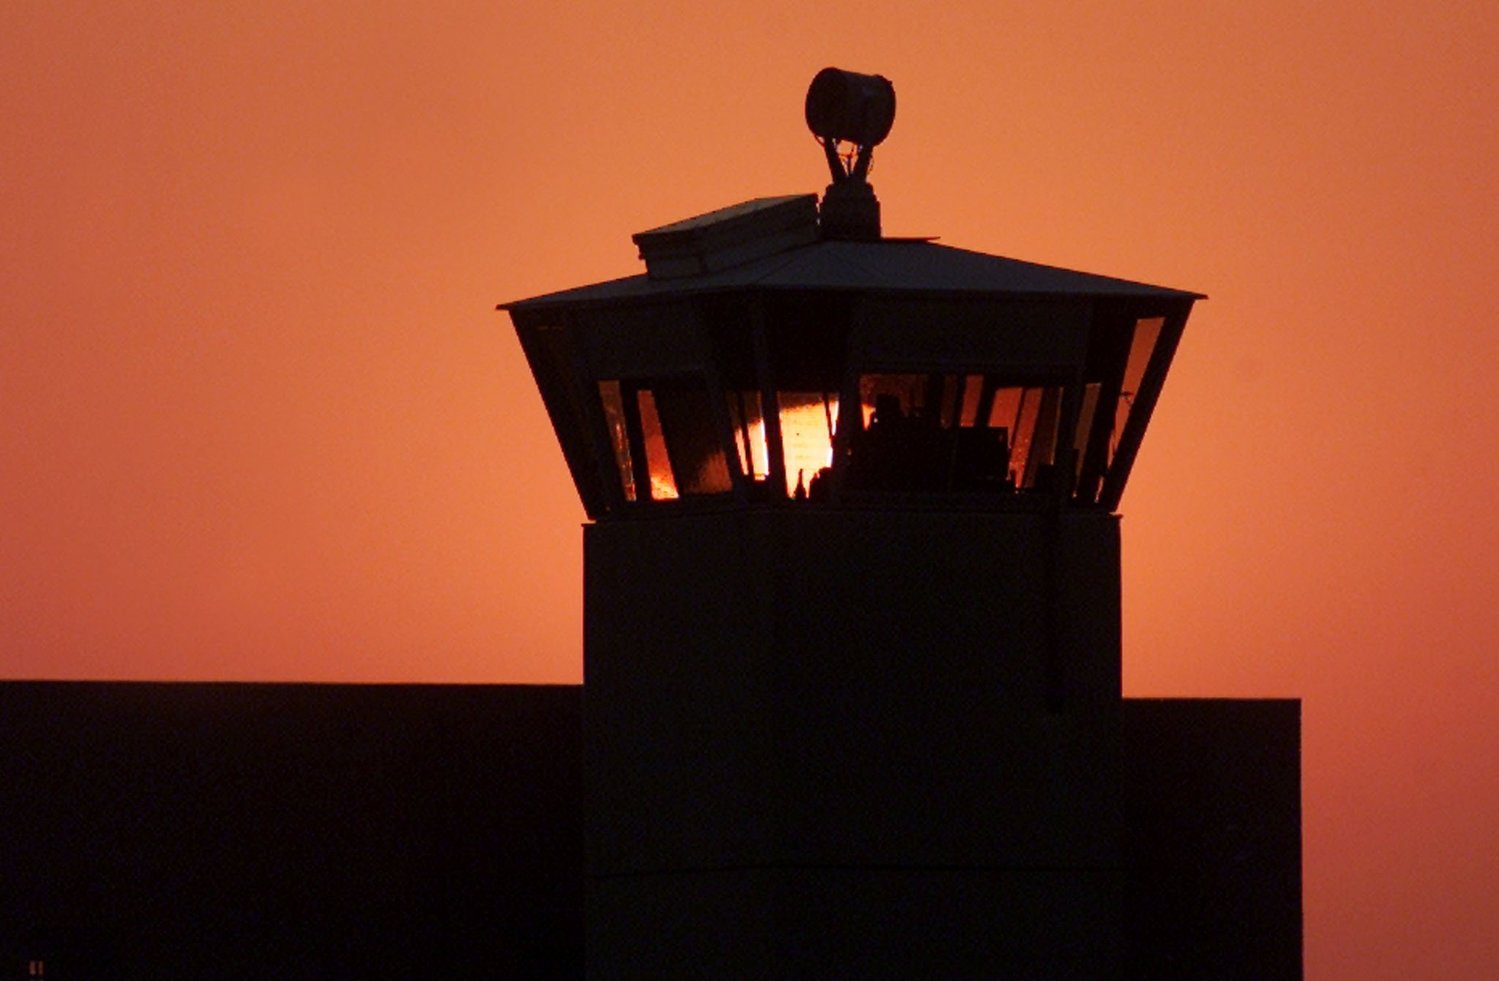 The sun sets behind one of the guard towers at the Federal Correctional Complex in Terre Haute, Ind., June 10, 2001. The death chamber at the correctional facility is where the federal death penalty is carried out.